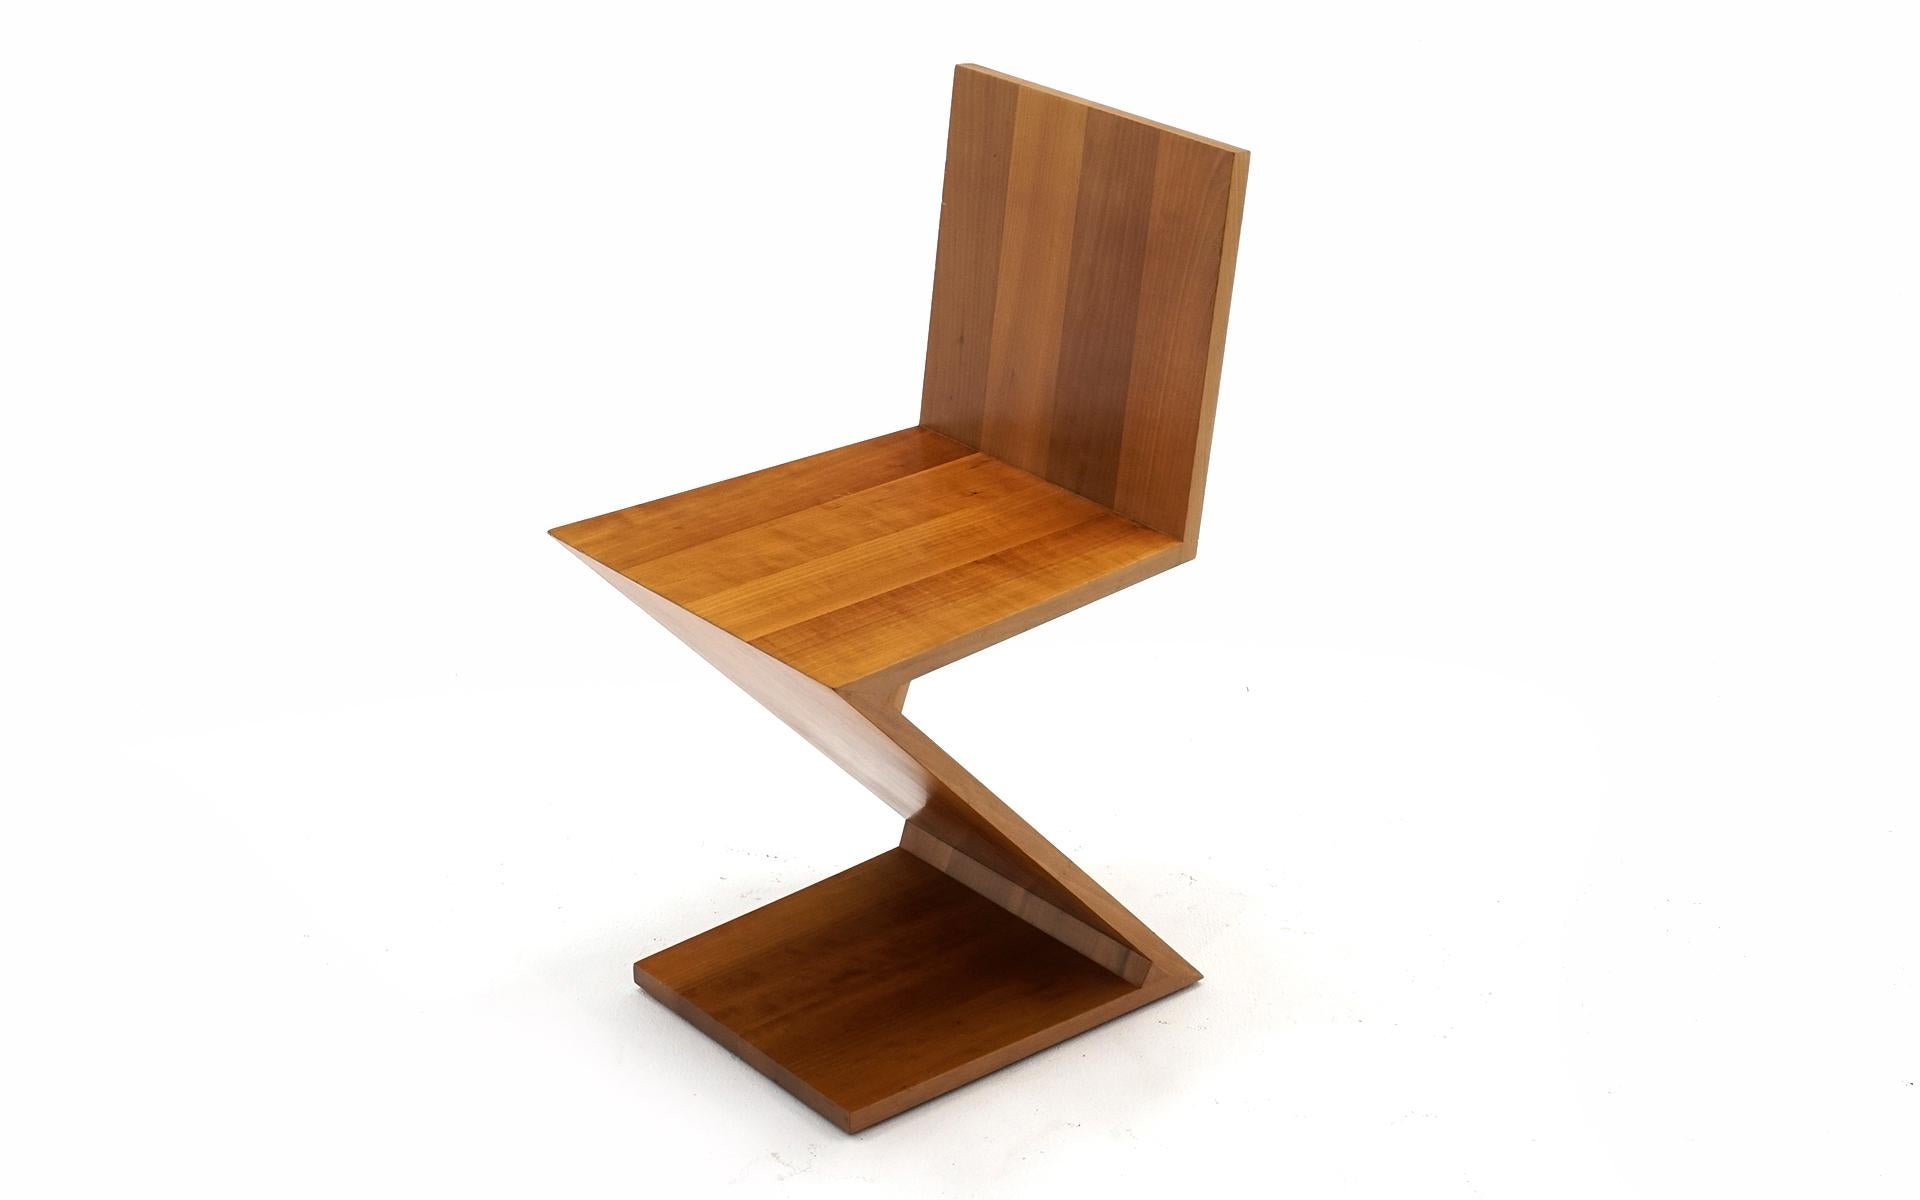 ZigZag chair or Z chair designed by Gerrit Rietveld and manufactured by Cassina, Italy. Originally designed in 1934, this is the licensed Cassina production. Expertly crafted of four wood boards end to end with beautiful dovetail joints. This